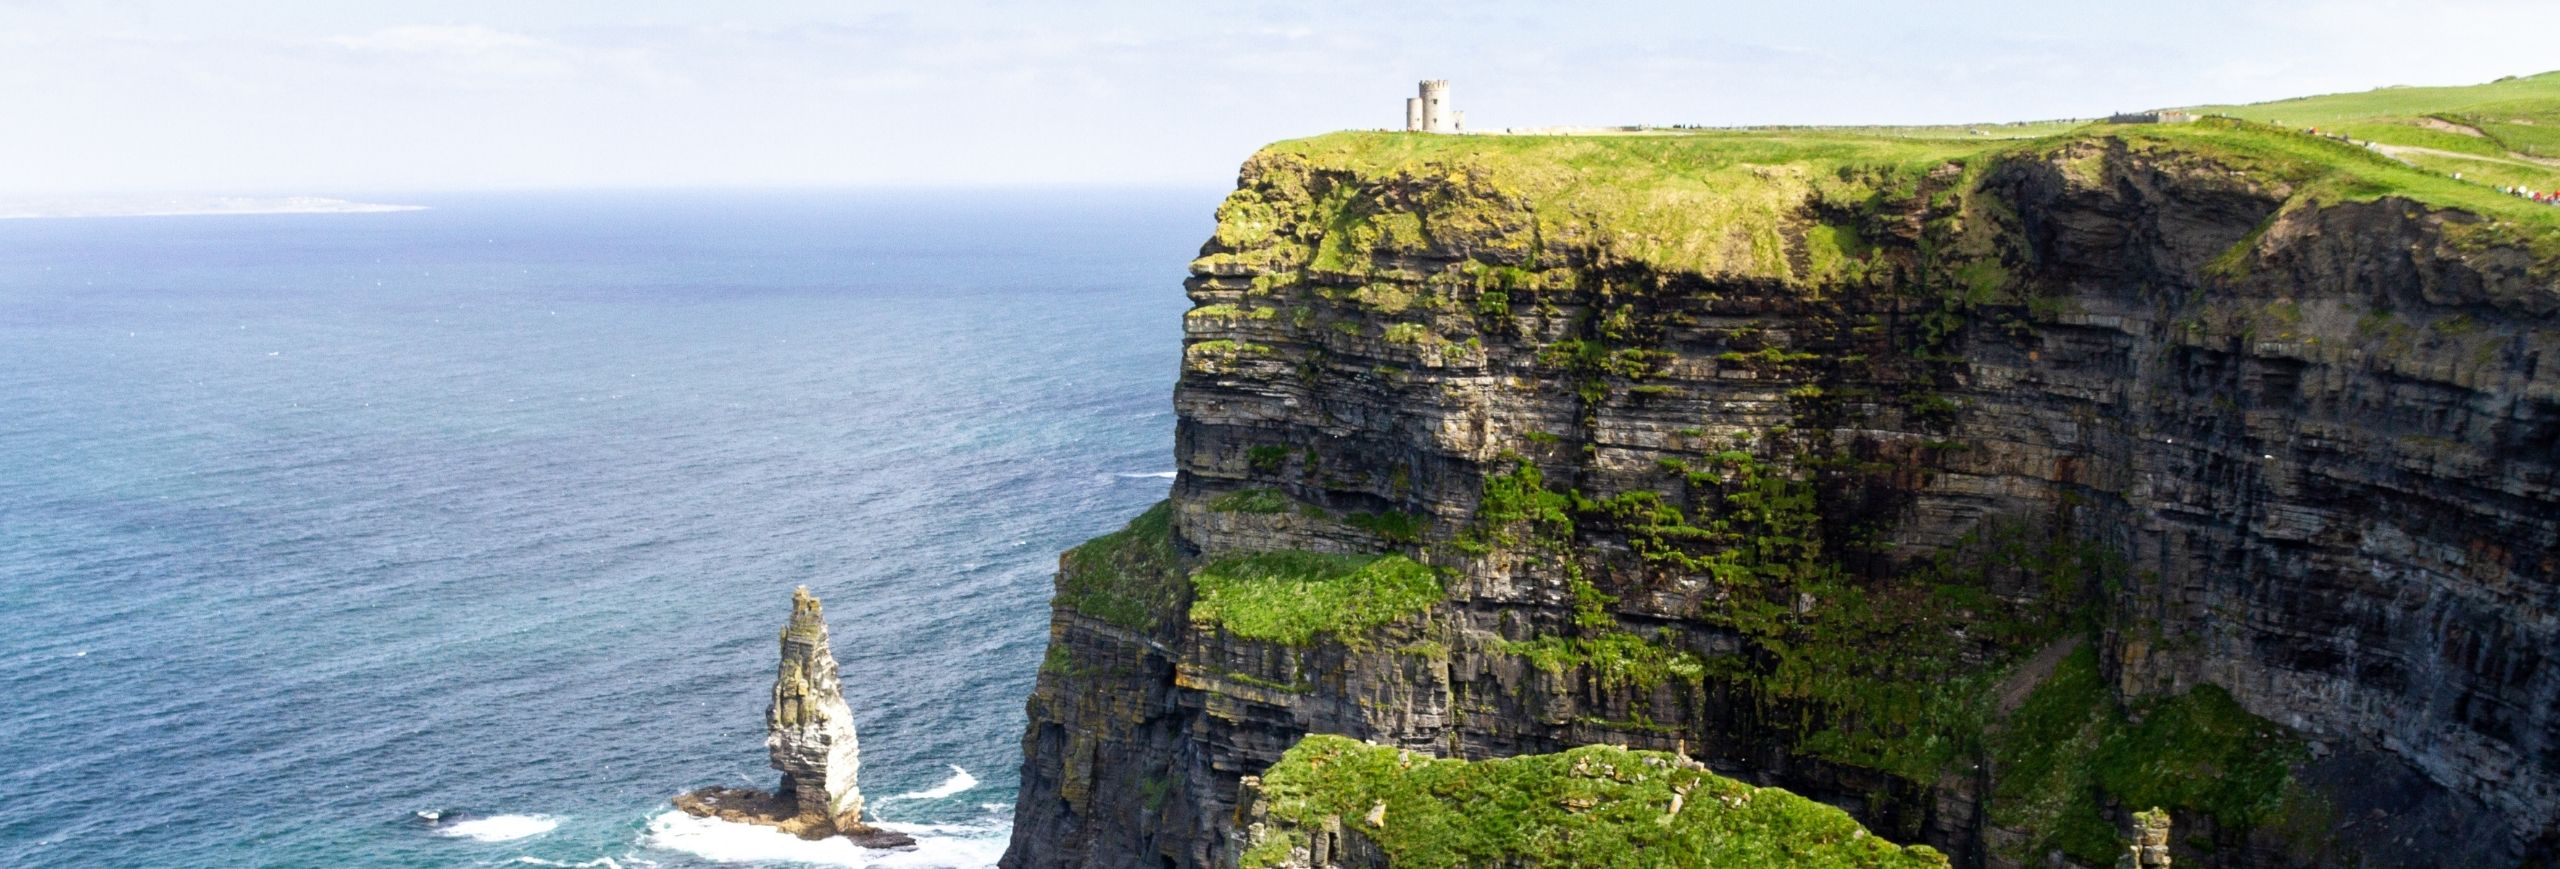 20 Ideas For Days Out In Ireland